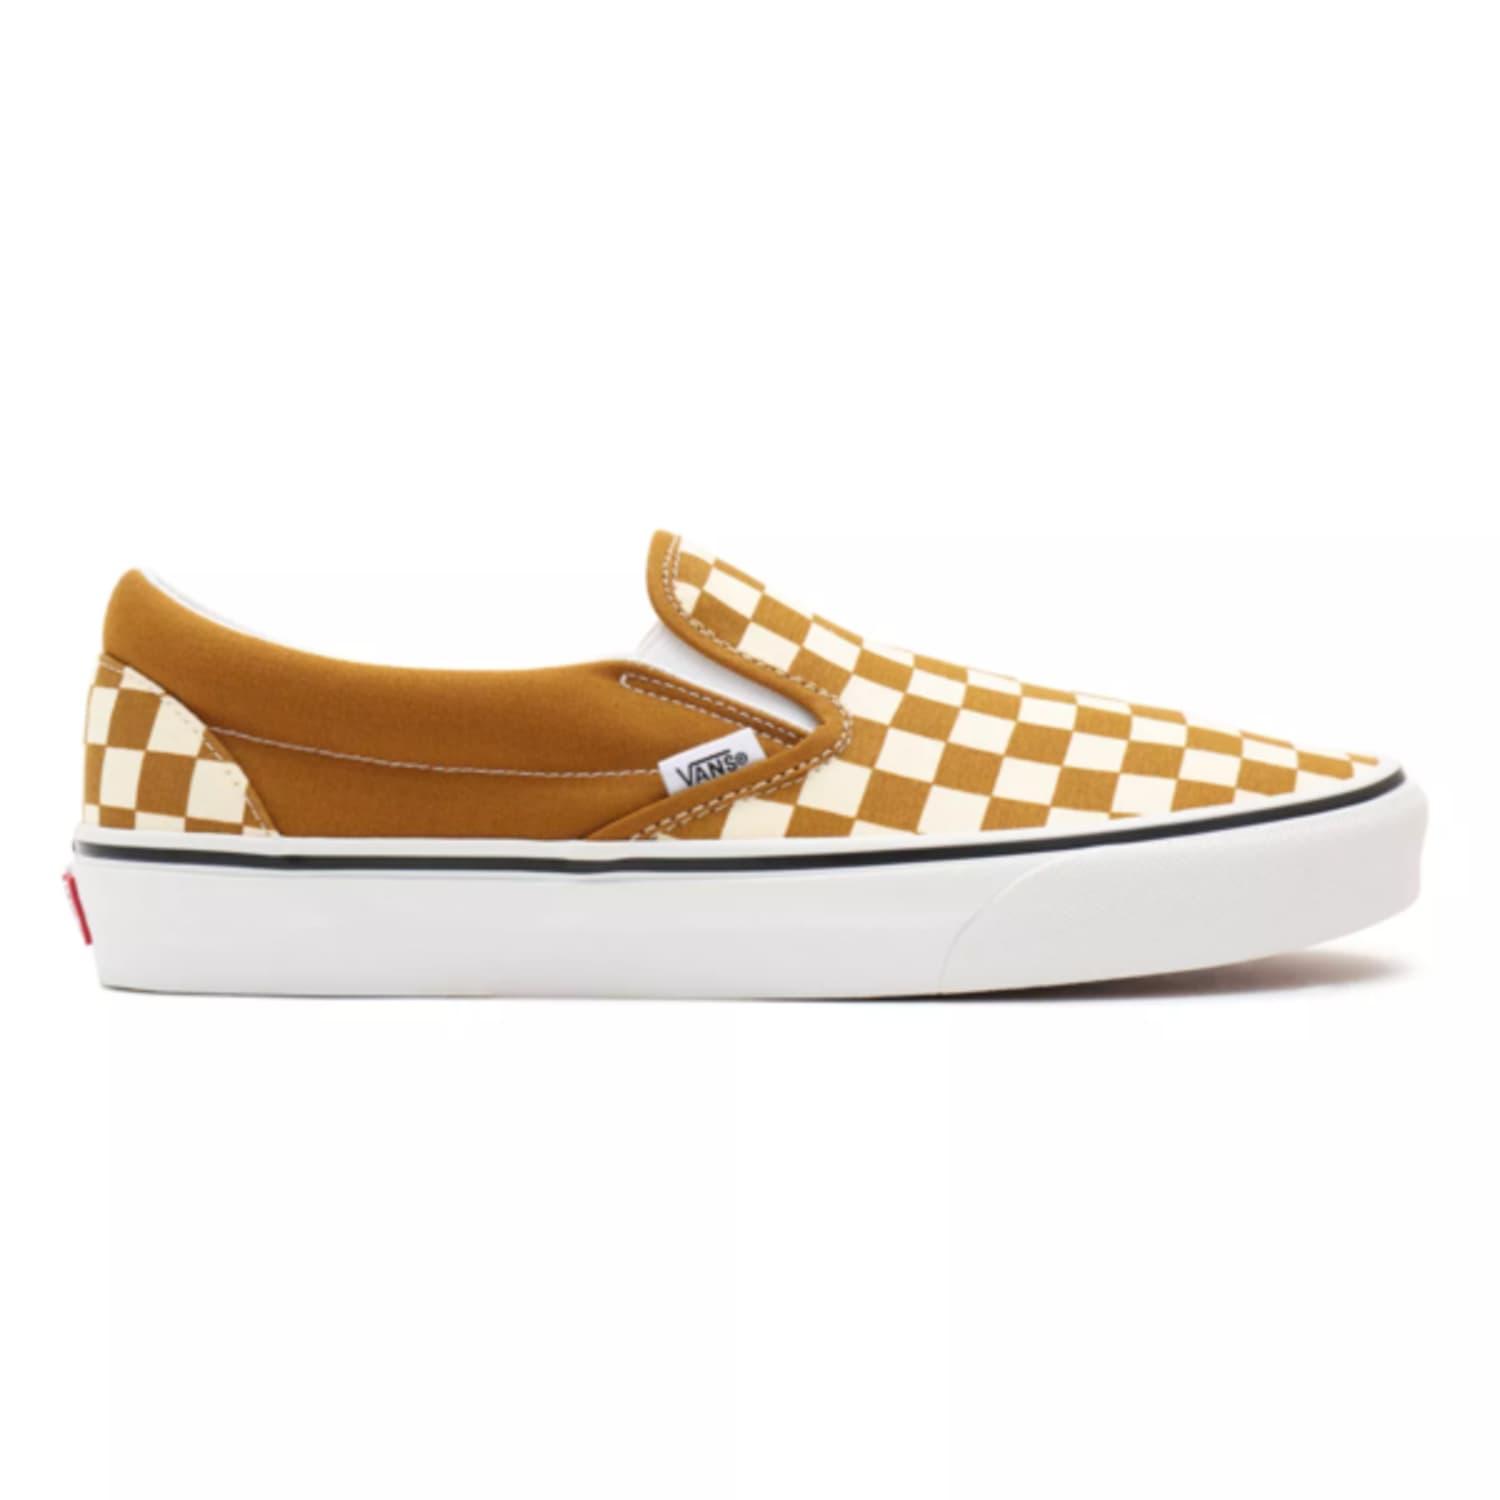 Vans Classic Slip On Shoes Checkerboard Golden Brown True White | Lyst